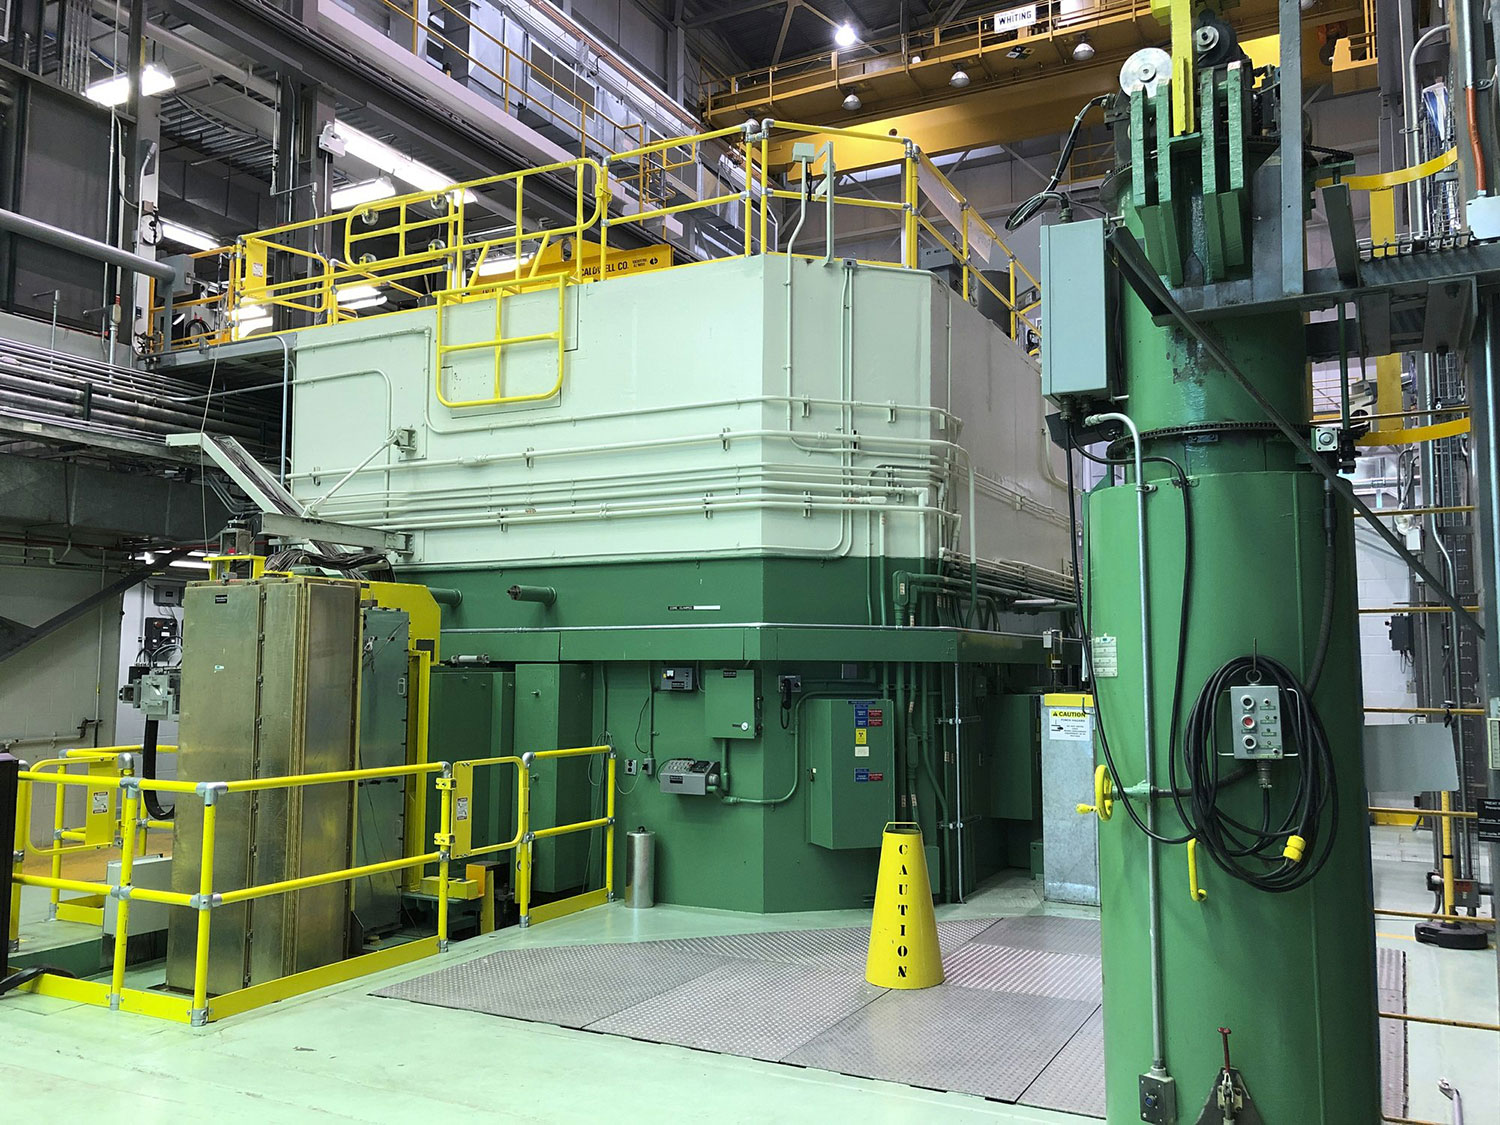 The image shows the Transient Test Reactor at the Idaho National Laboratory.